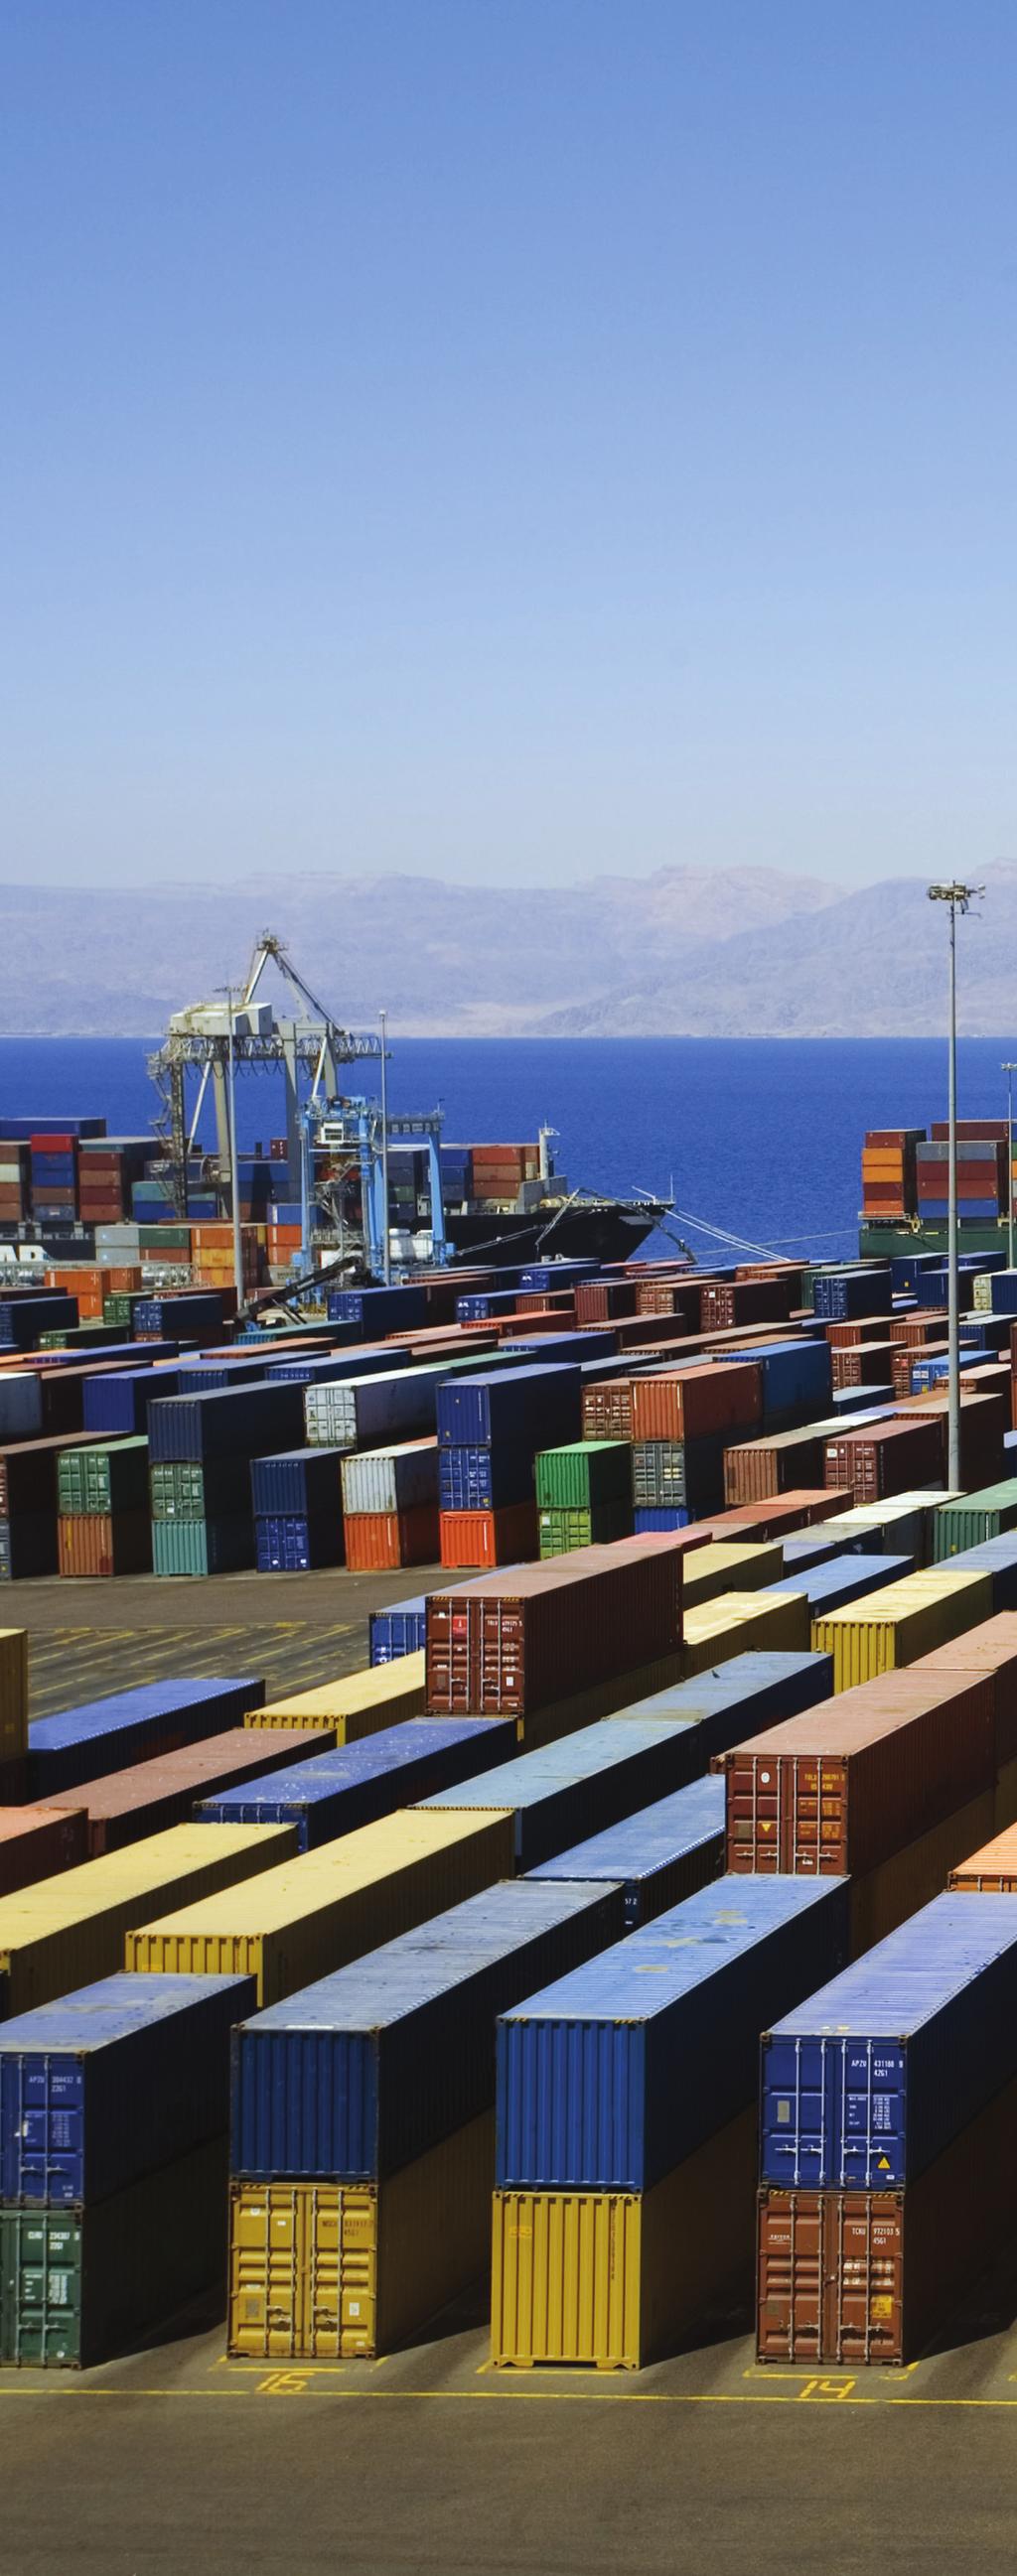 Outcome of West Coast Longshore Strife The latest container data show the US Pacific ports on the road to a recovery in share. Who were the winners of the cargo that was diverted?